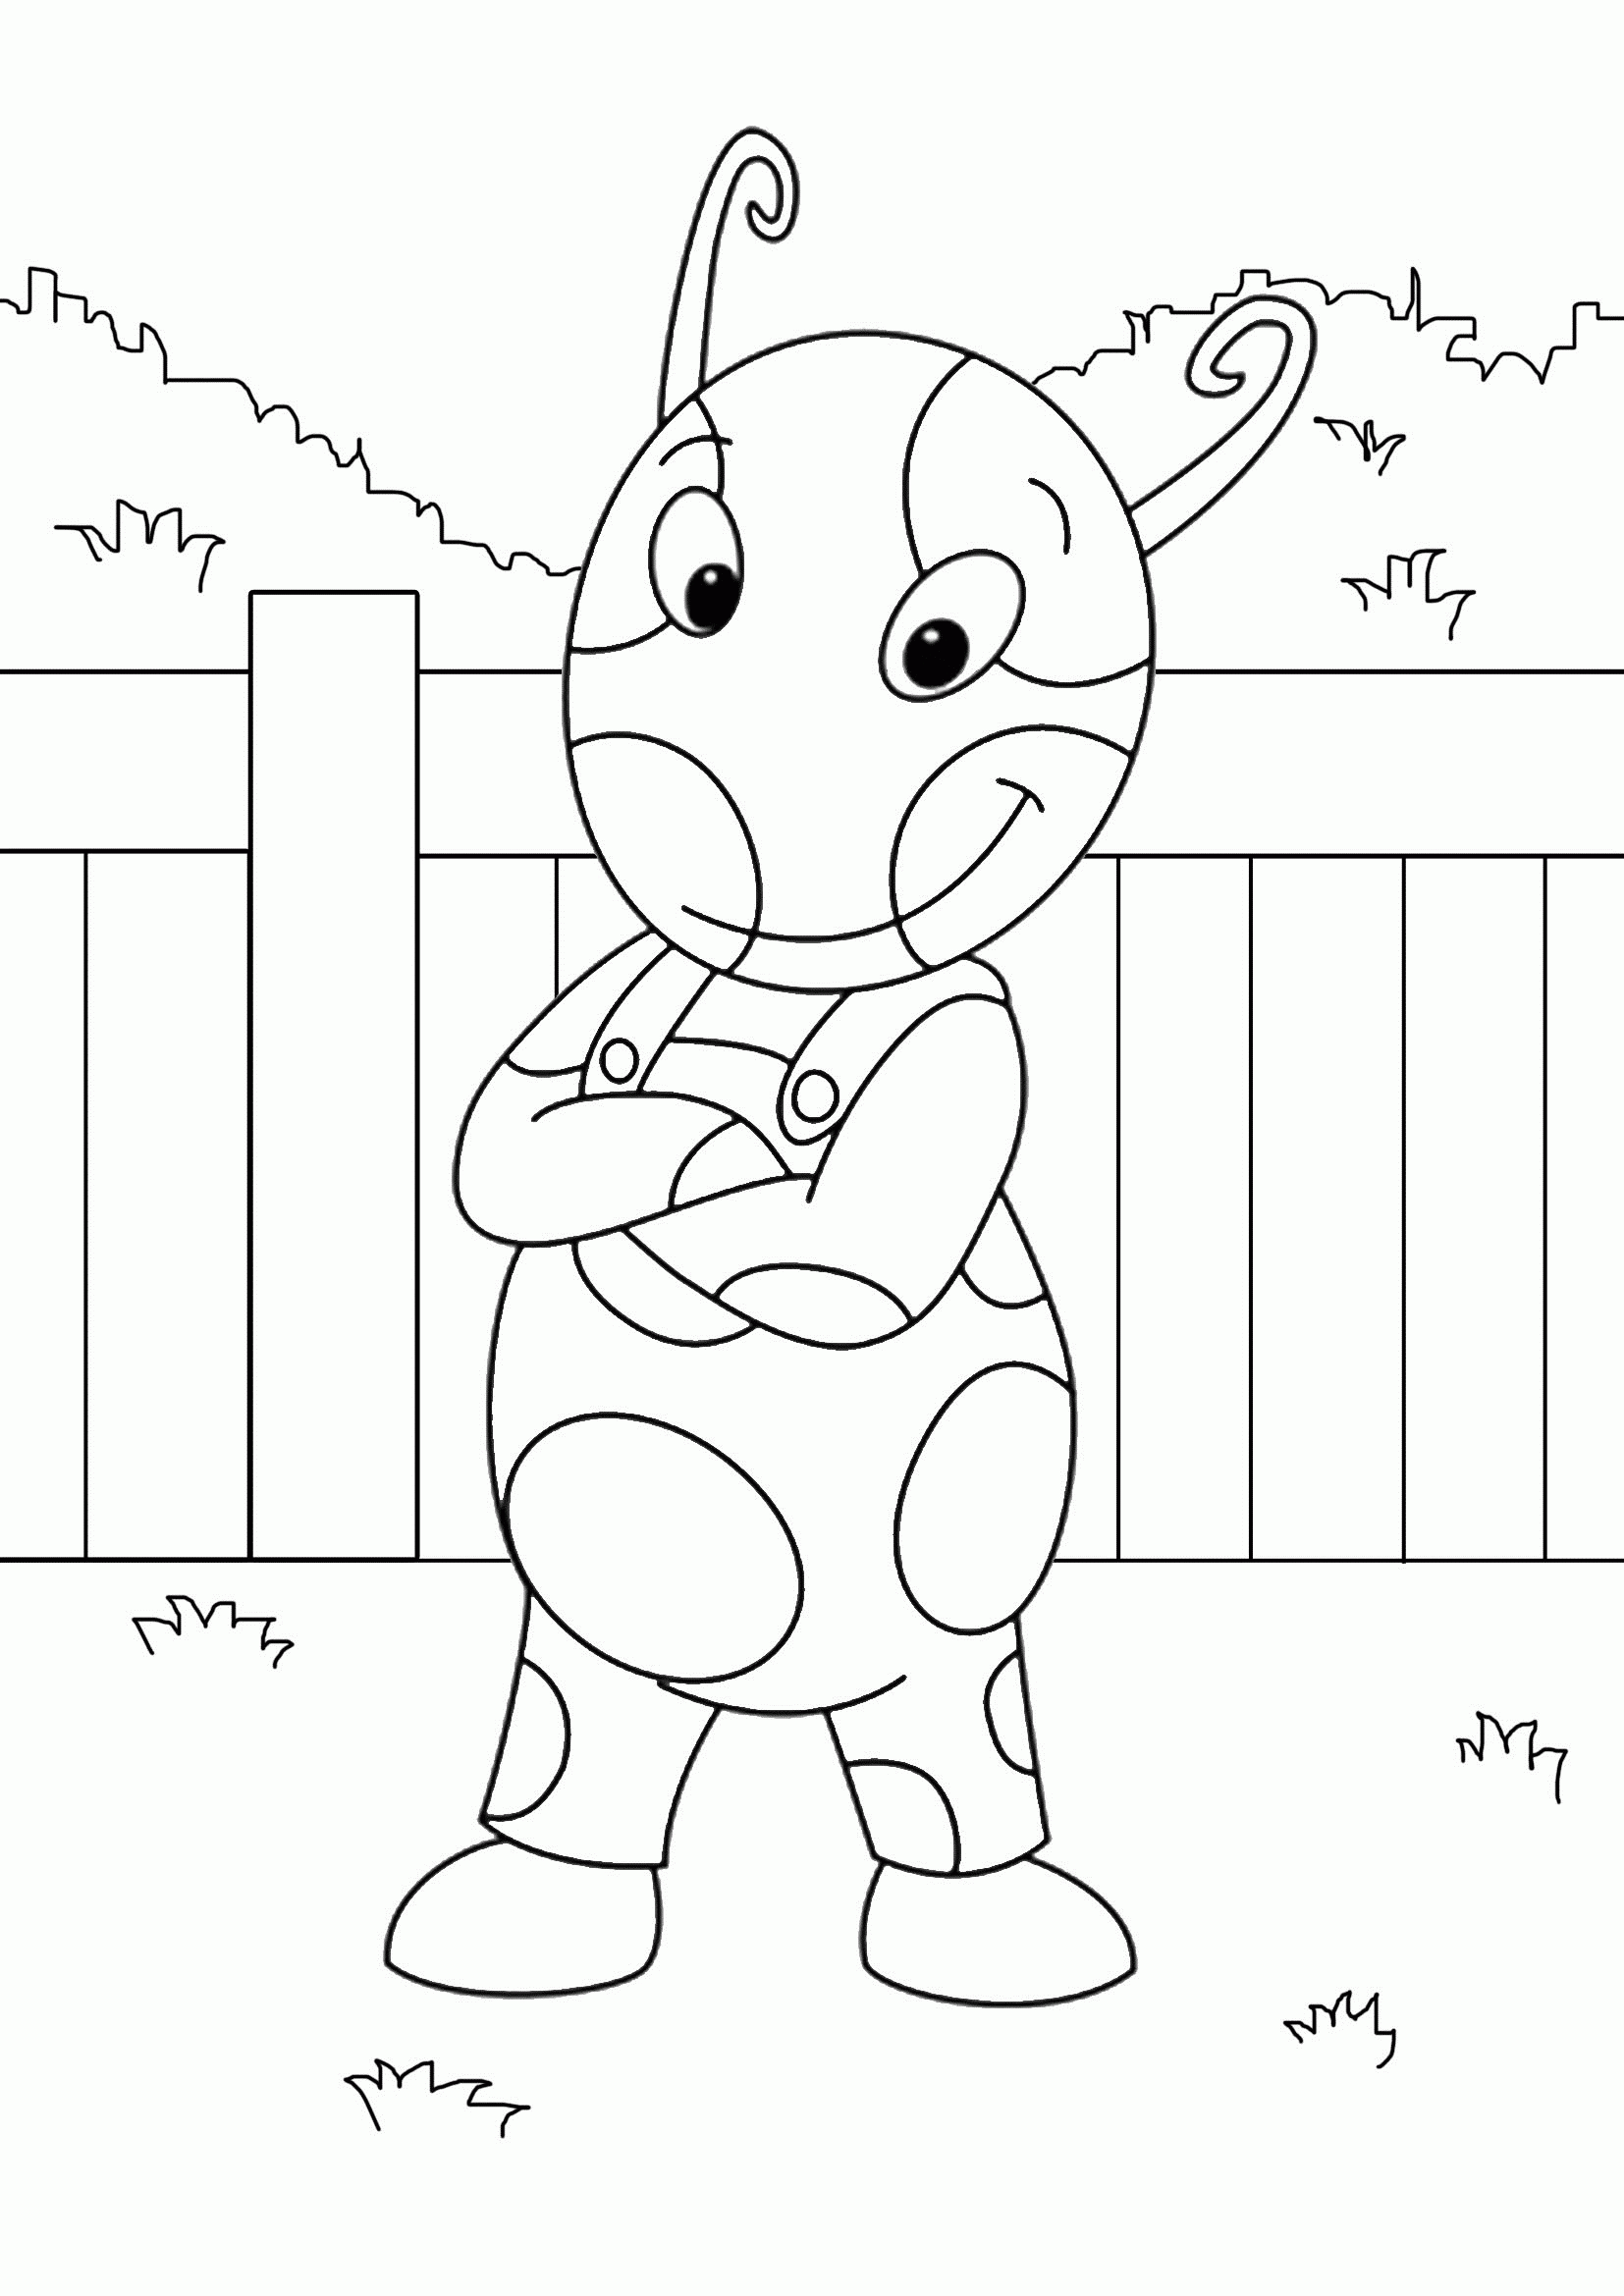 Free Printable Backyardigans Coloring Pages For Kids   Coloring Home